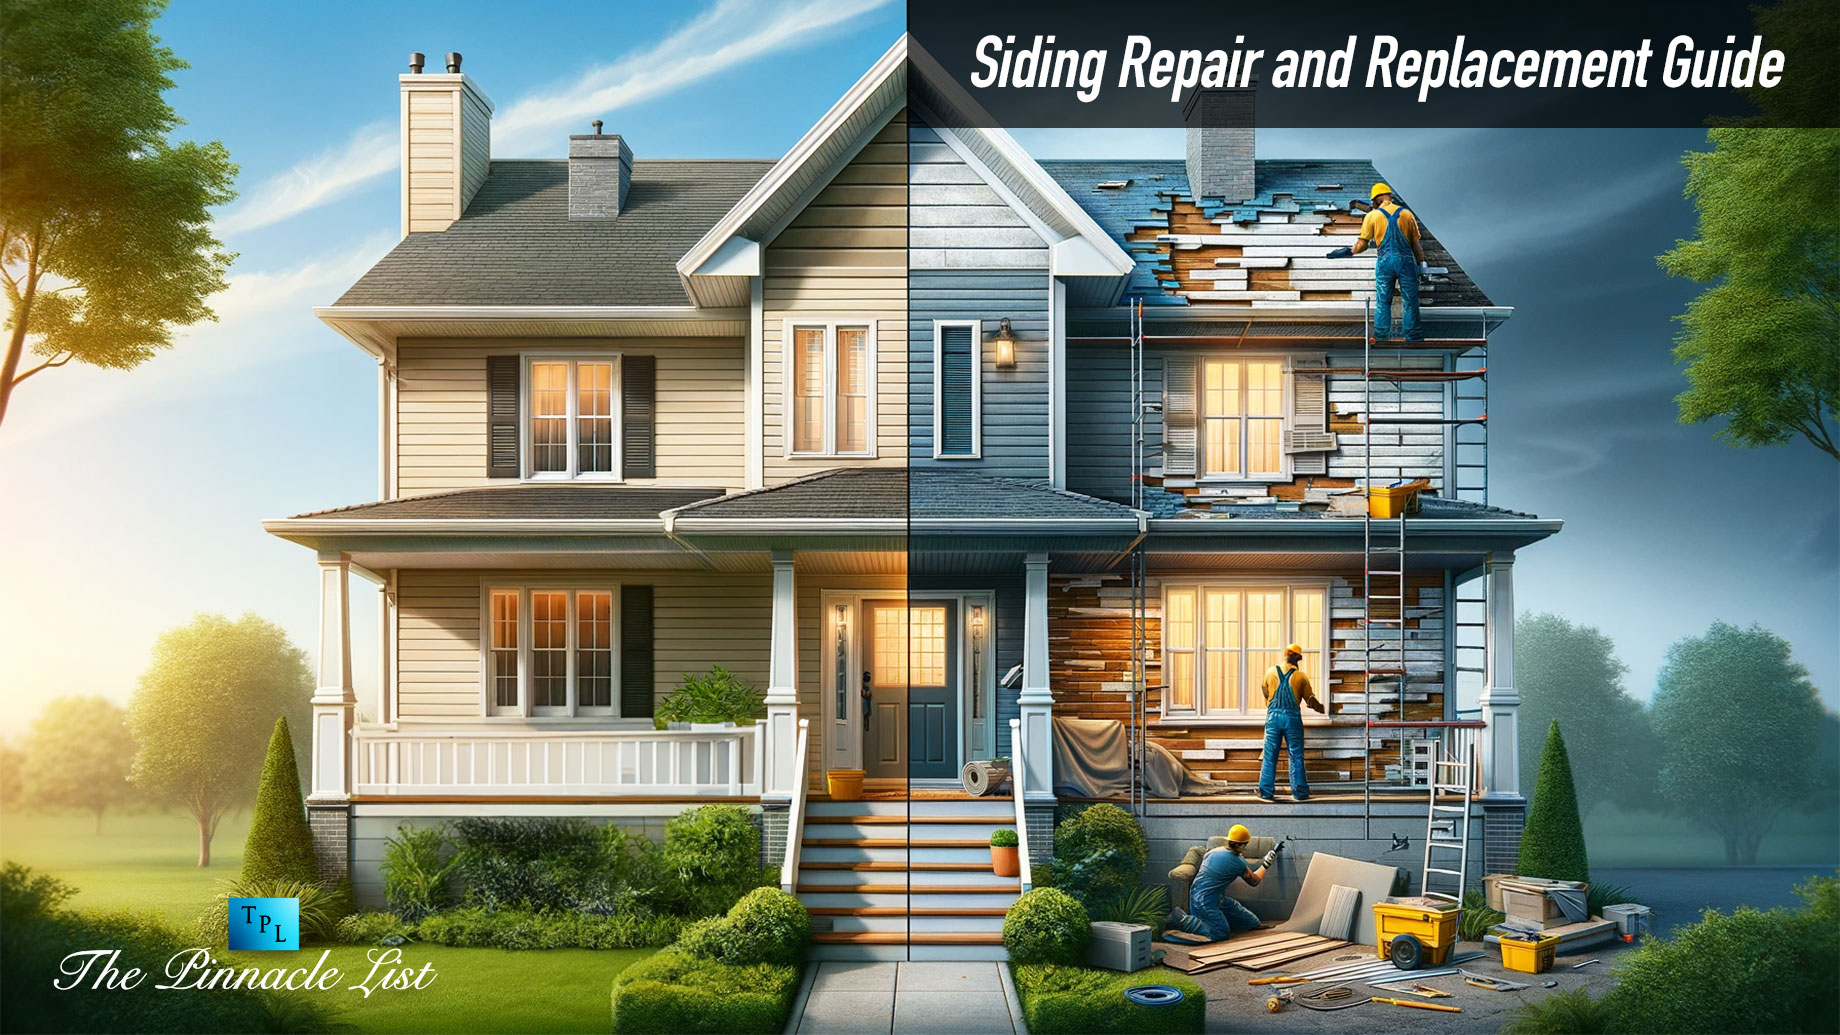 Siding Repair and Replacement Guide